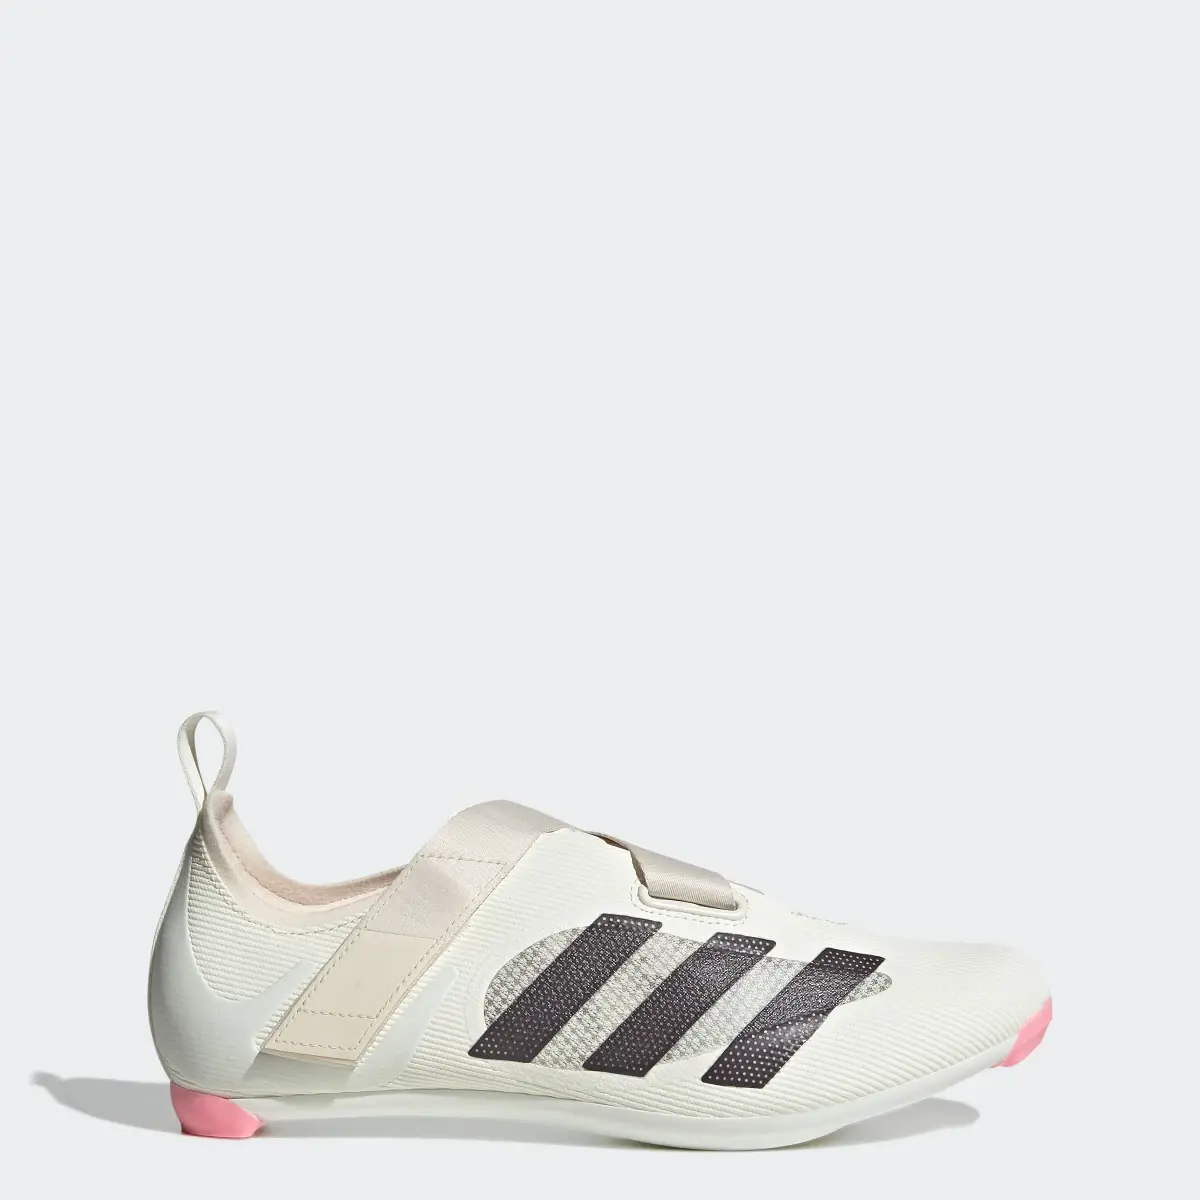 Adidas CHAUSSURE D'INDOOR CYCLING. 1